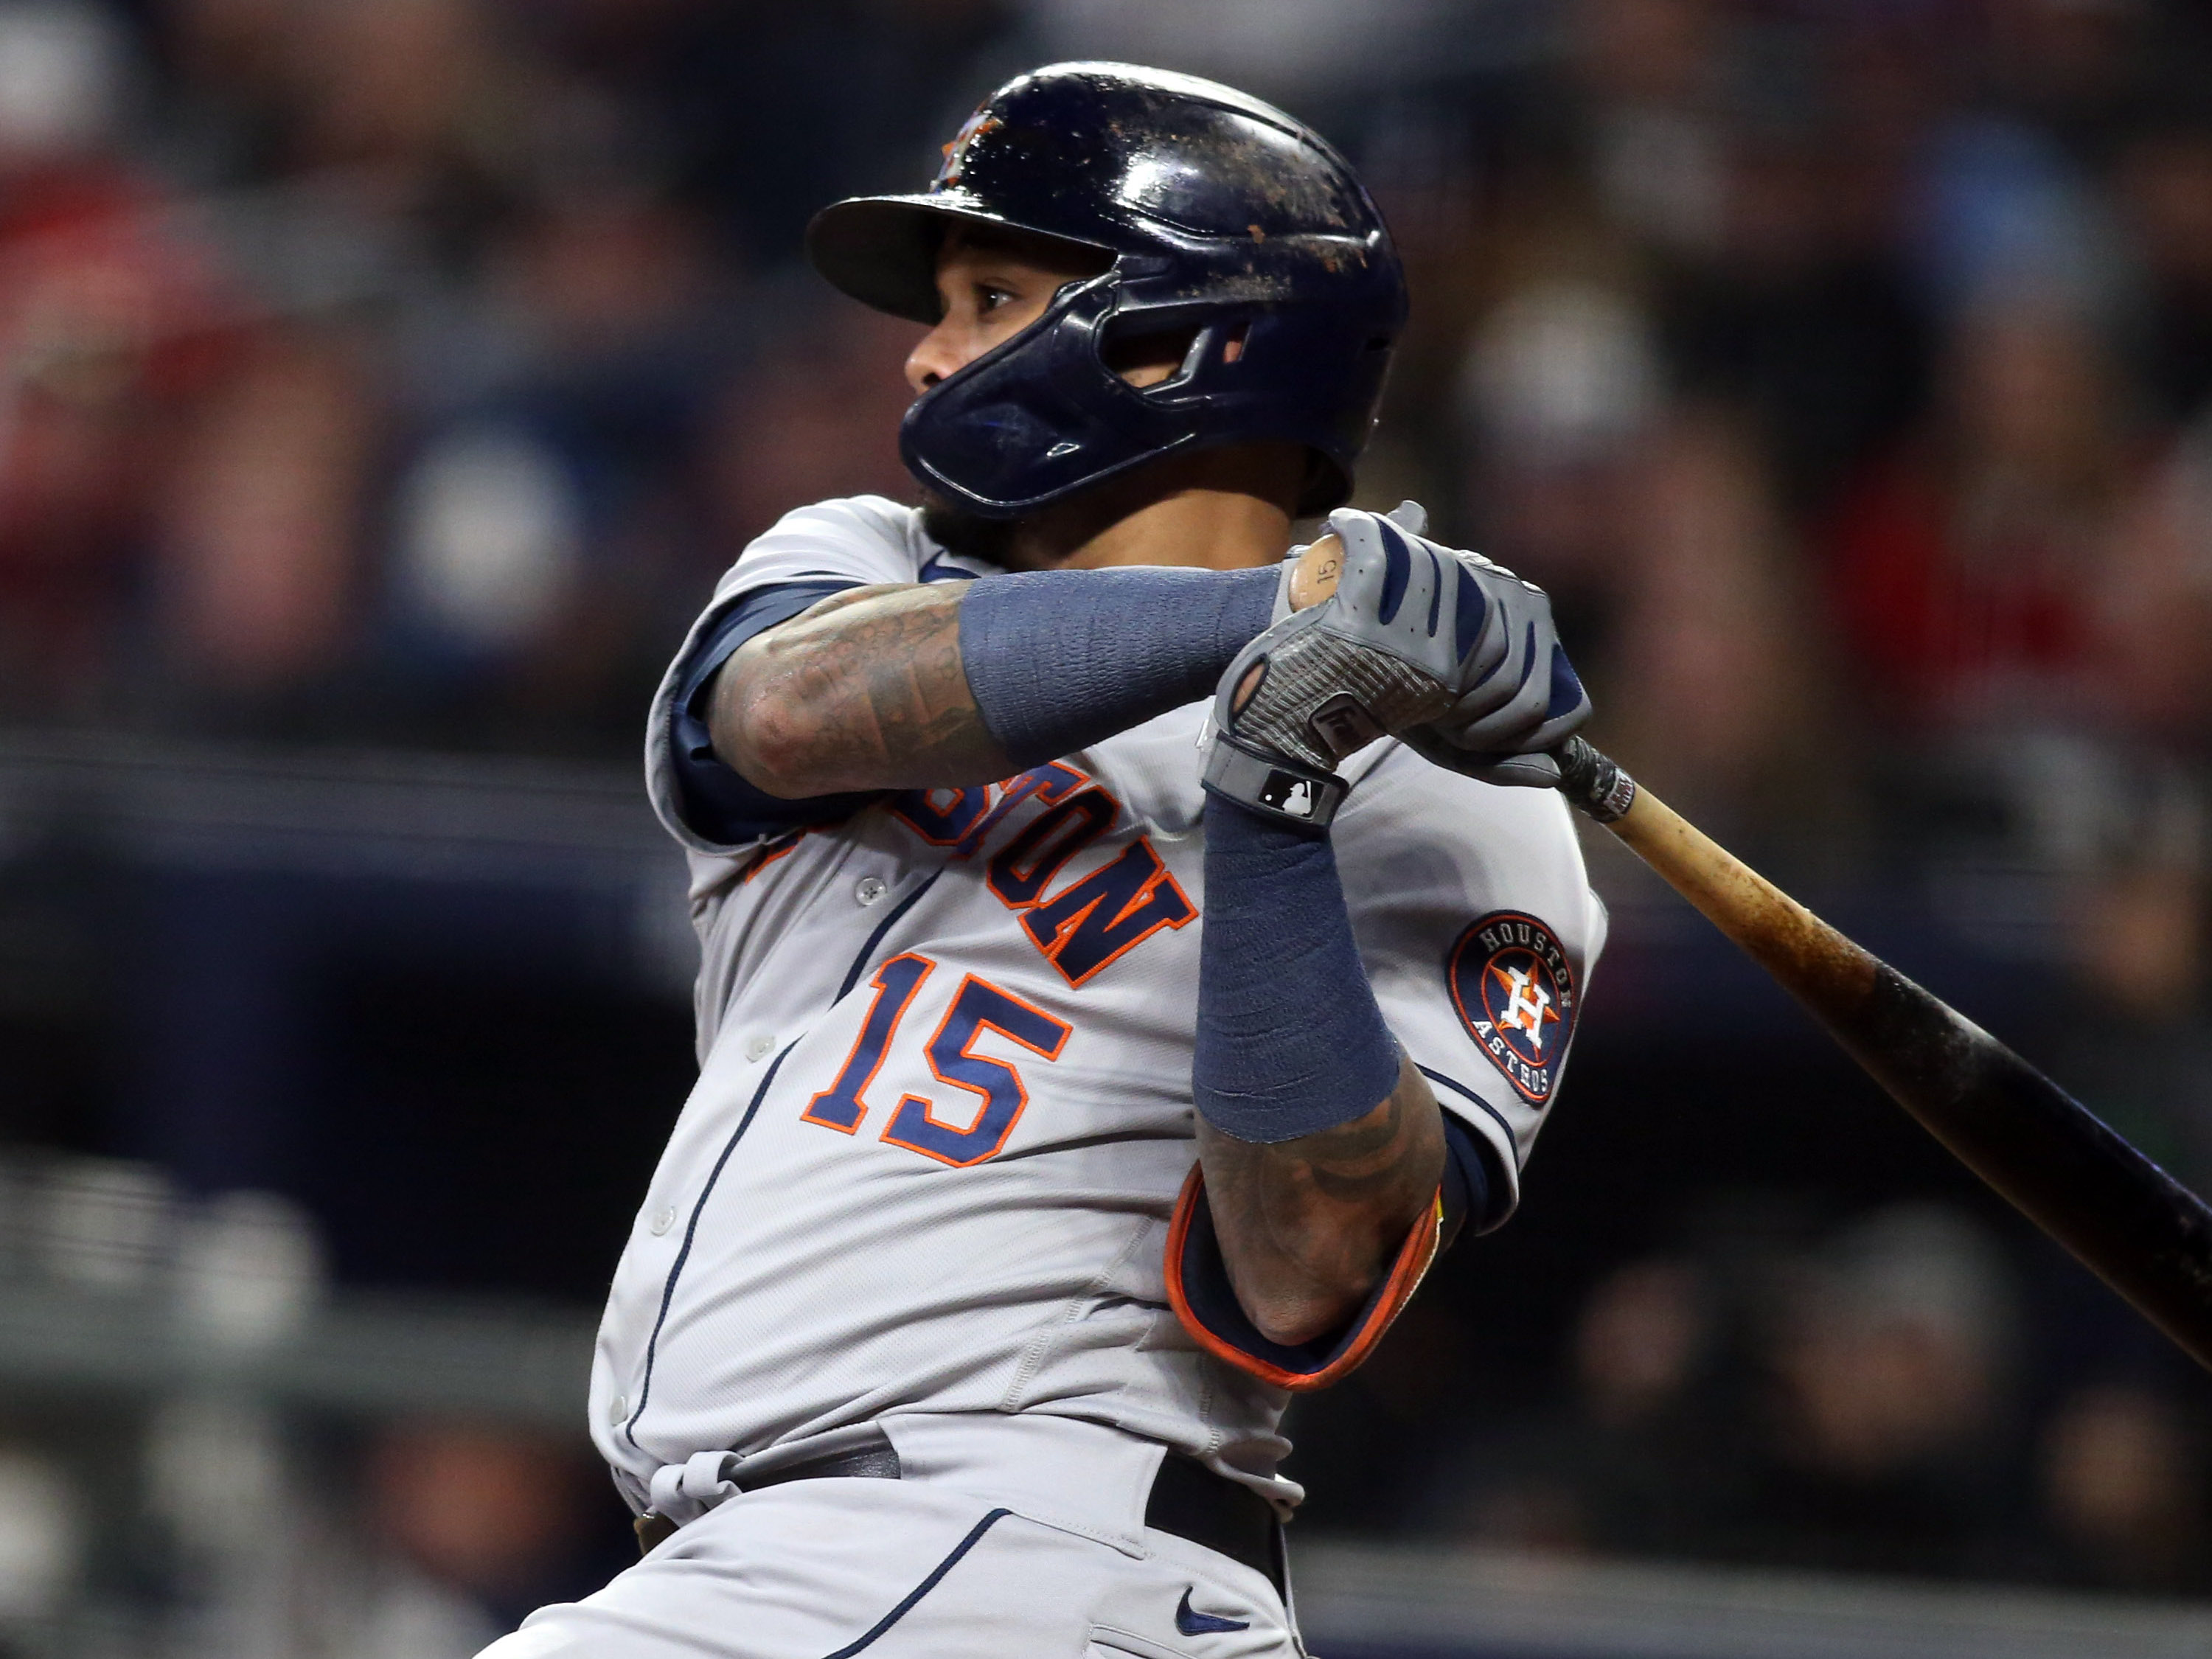 Houston Astros catcher Martin Maldonado (15) hits an RBI double against the Atlanta Braves during the seventh inning of game five of the 2021 World Series at Truist Park.